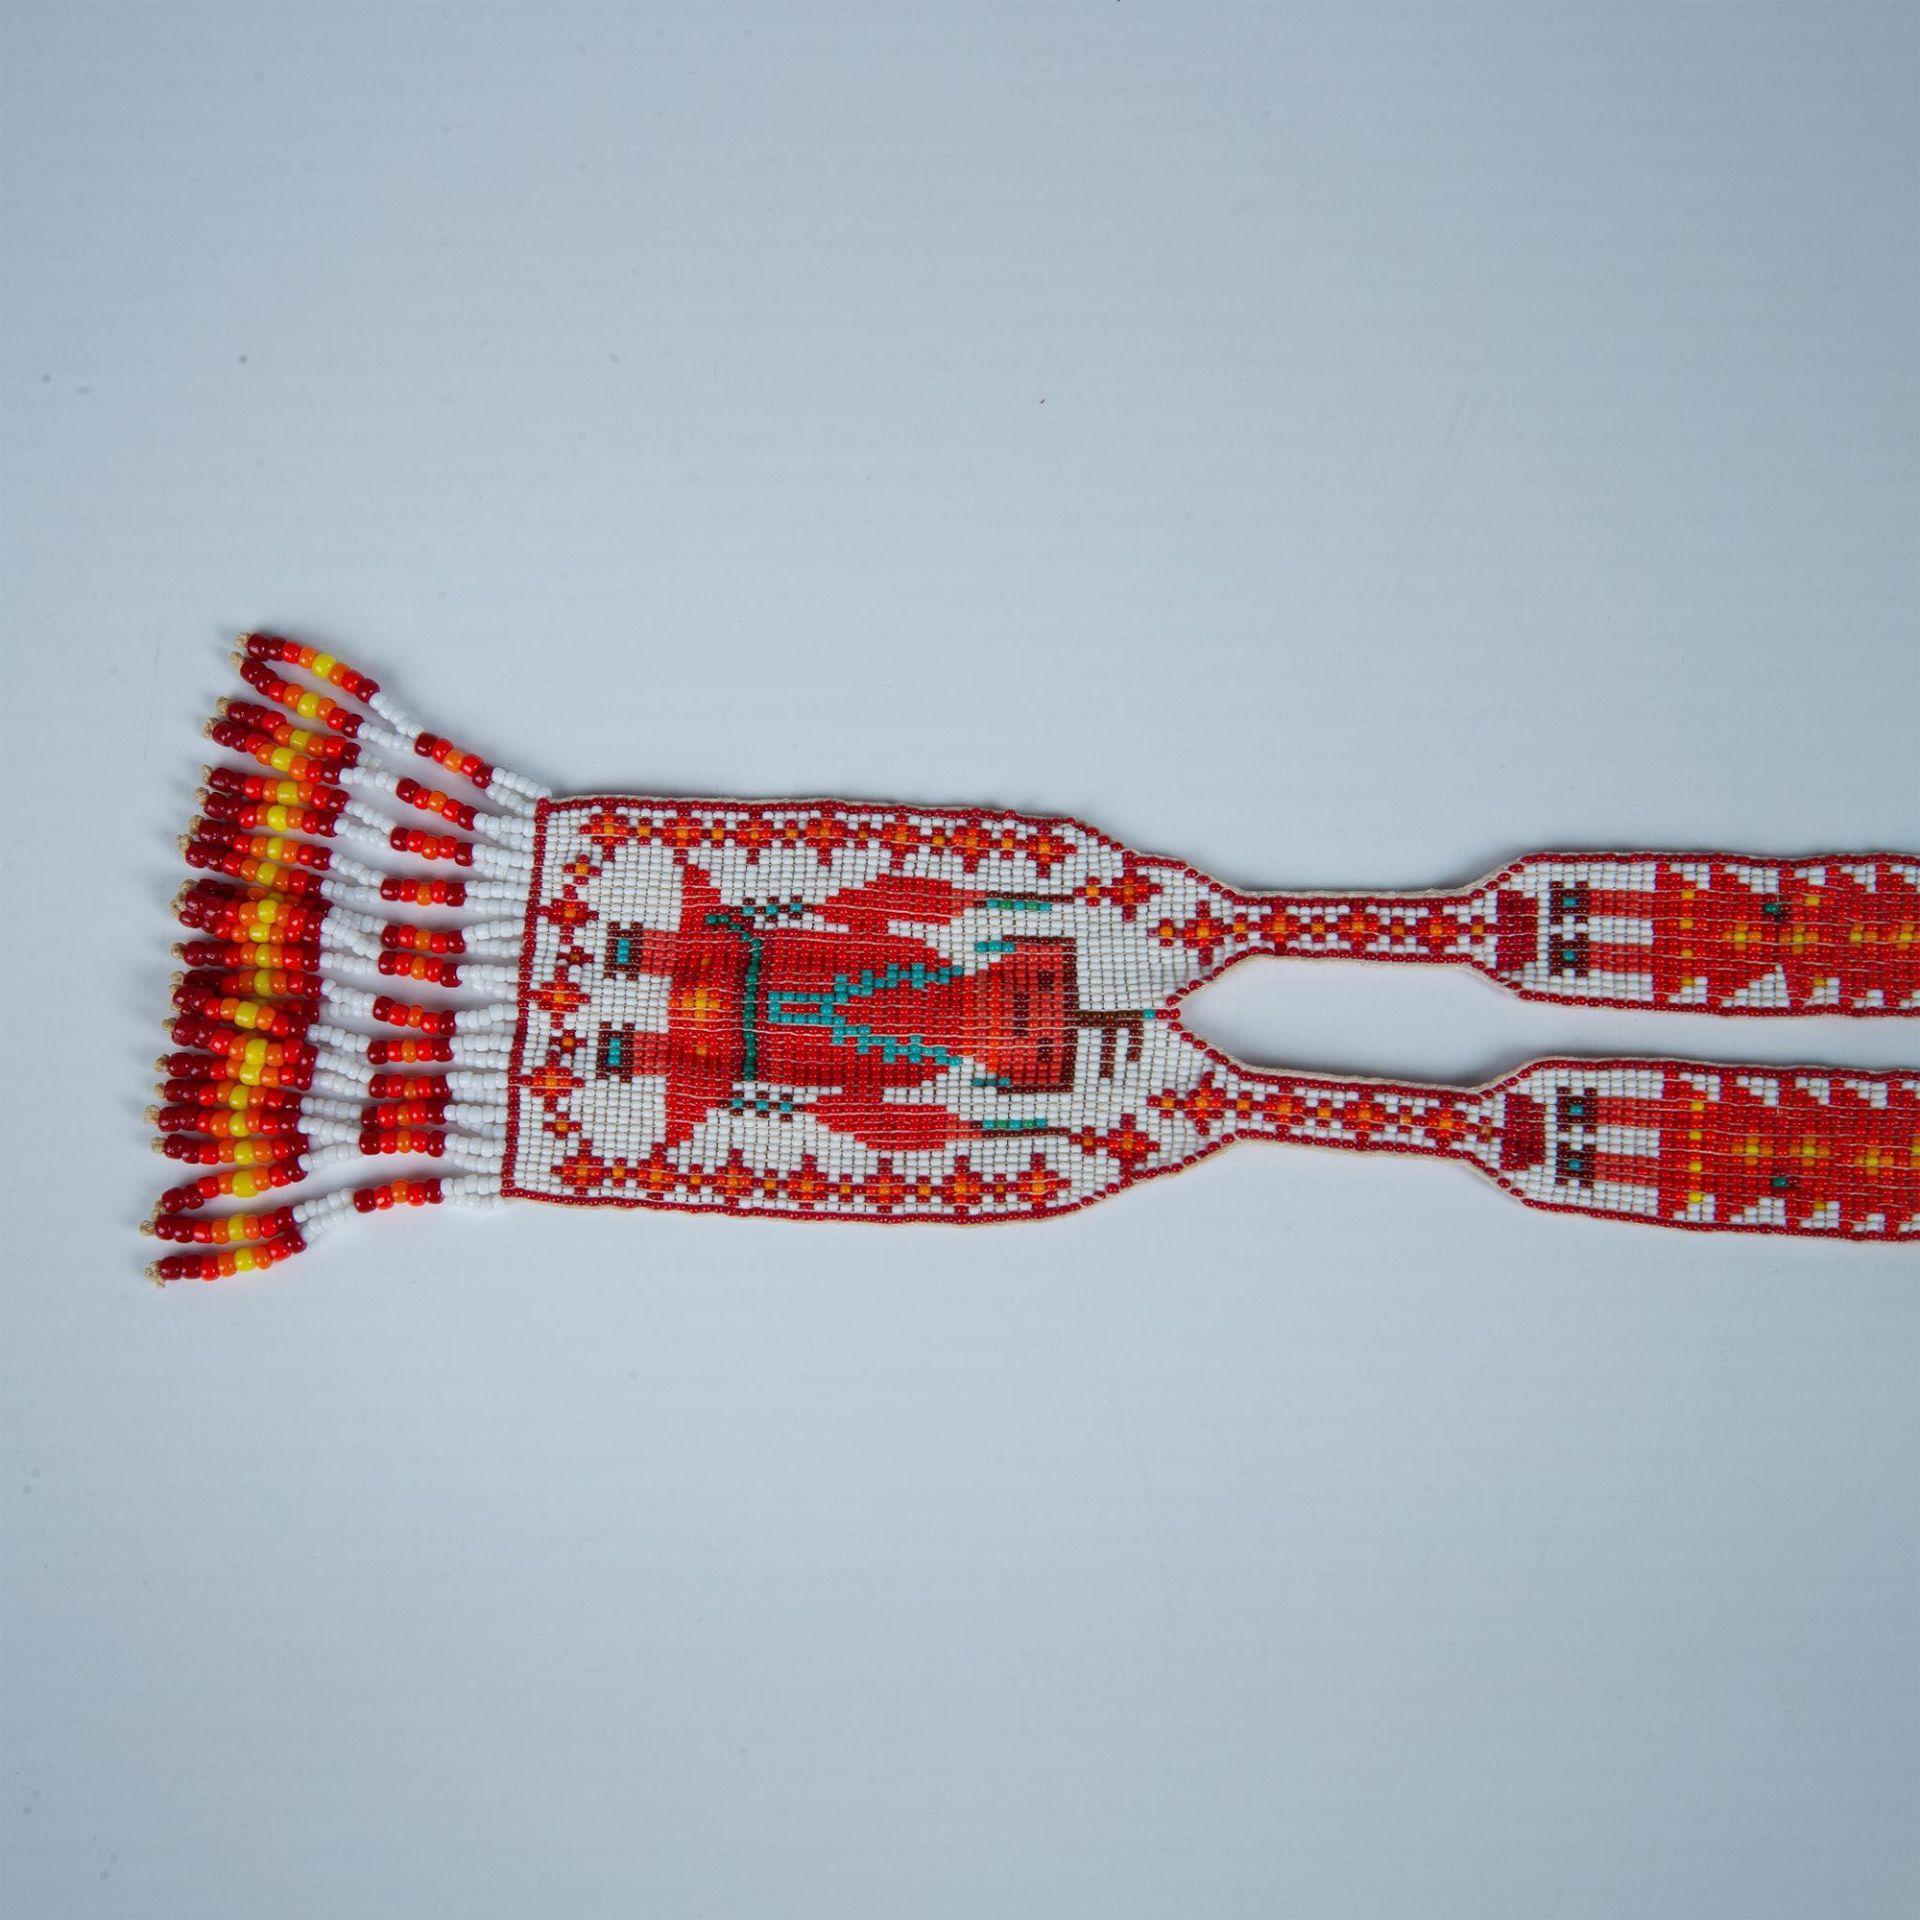 Bold Native American Intricately Hand-Woven Bead Necklace - Image 3 of 4